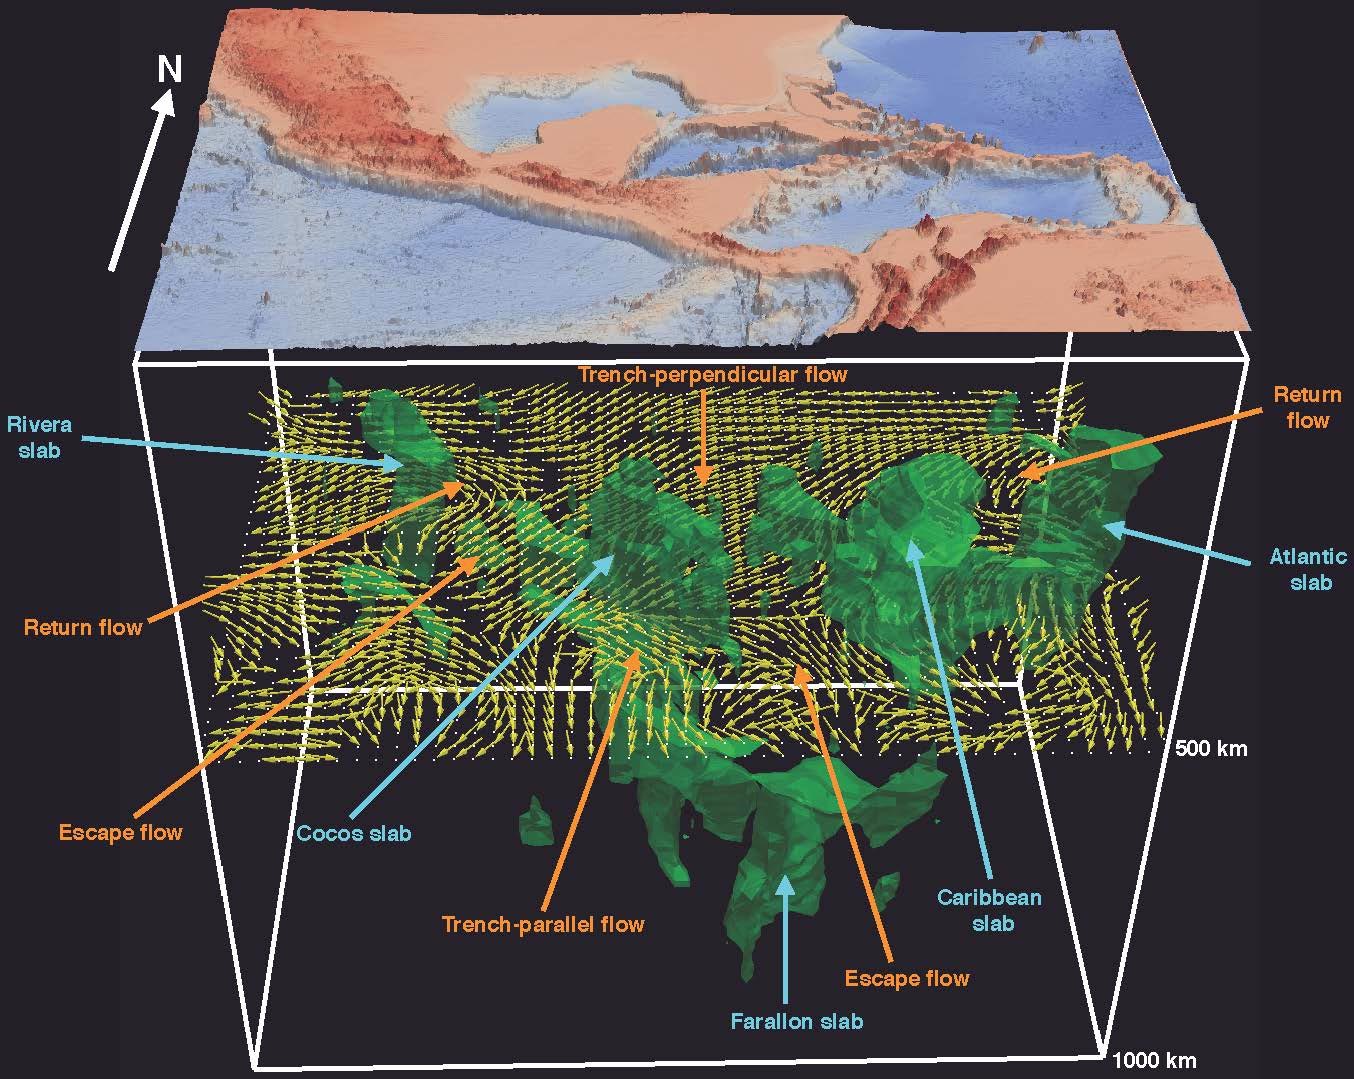 Deeper Look at Dynamic Geological Processes Below Earth's Surface With 3D Image